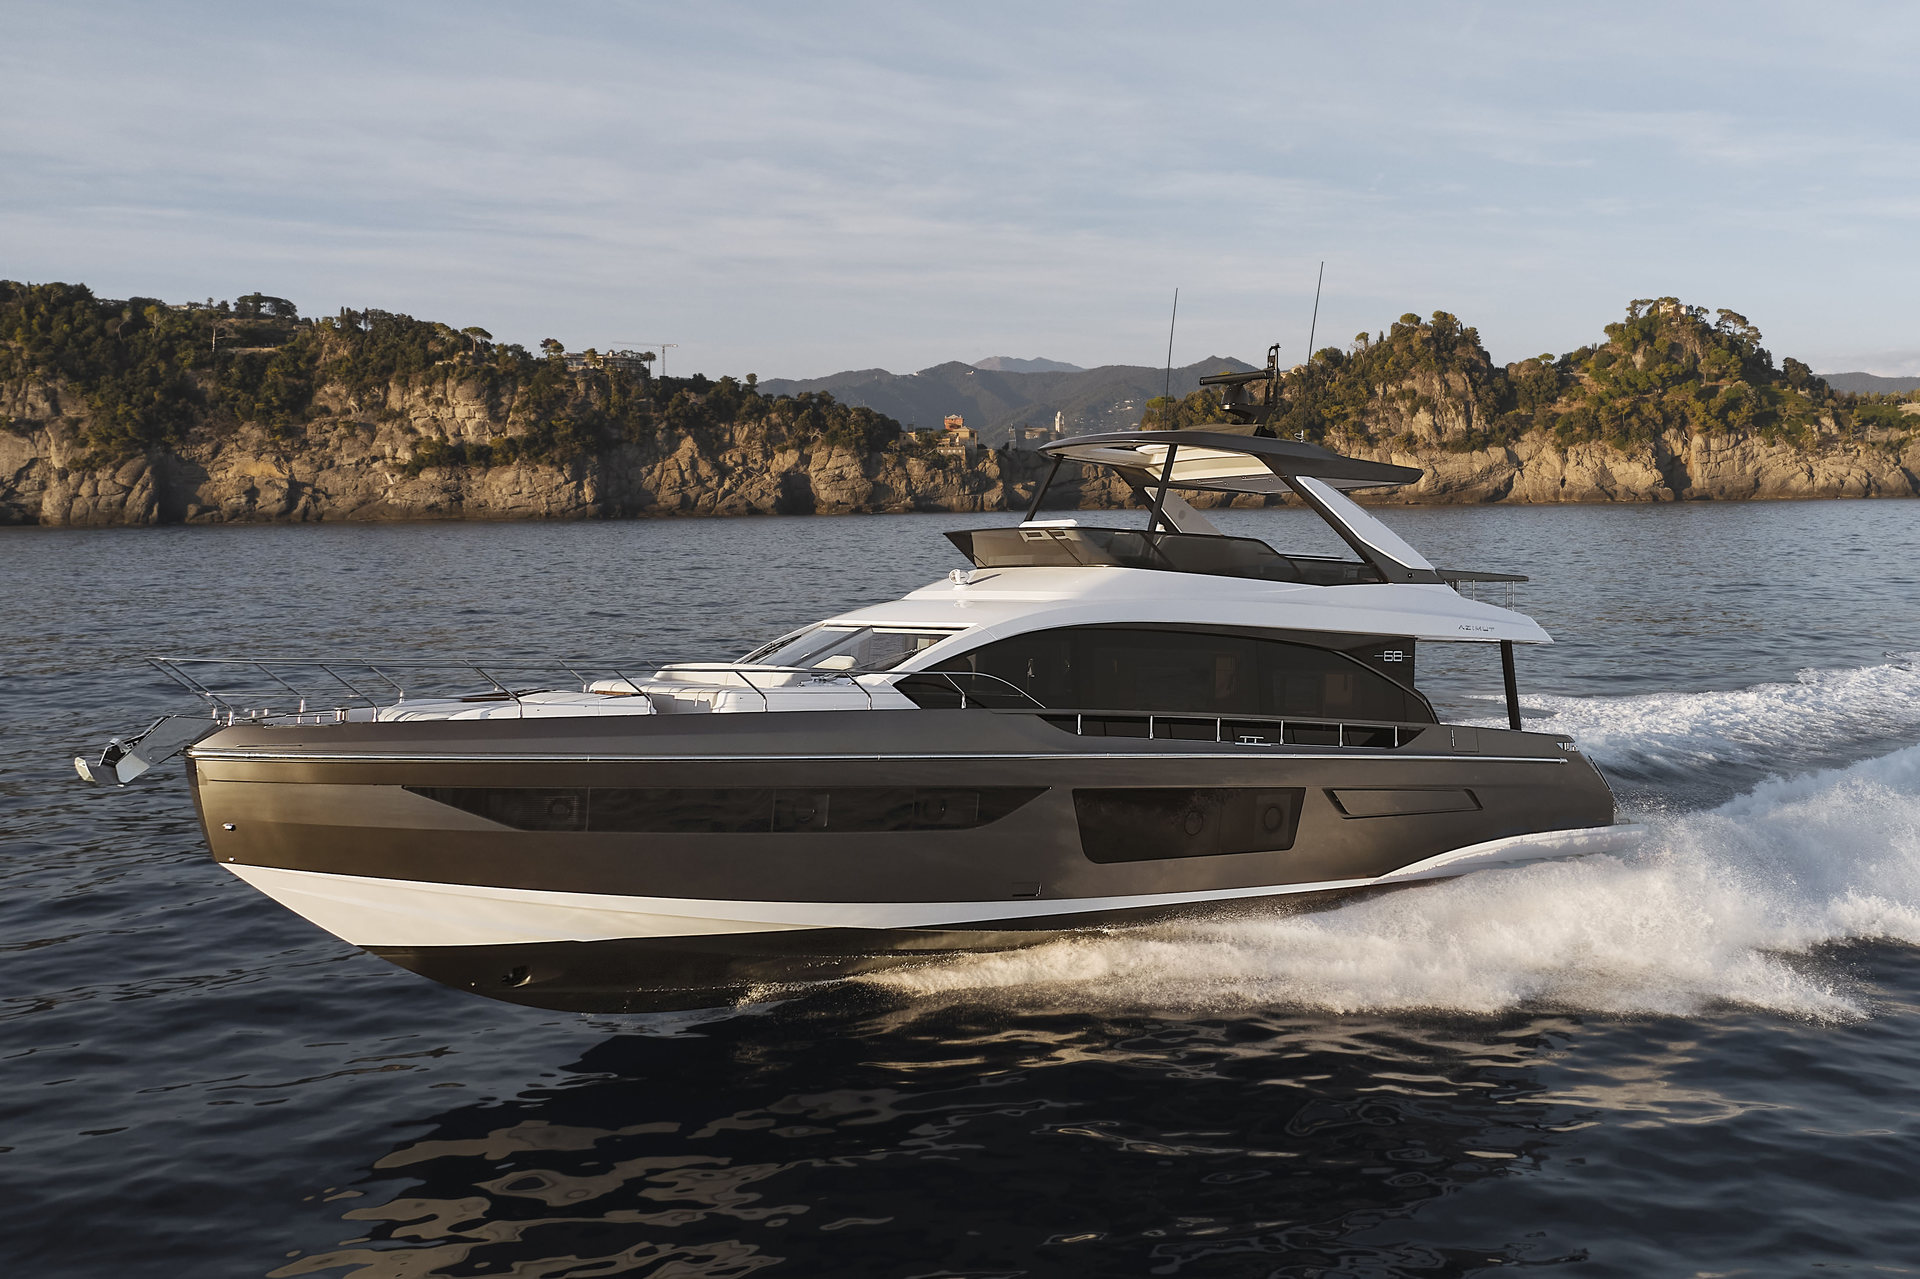 360 VR Virtual Tours of the Azimut Fly 68